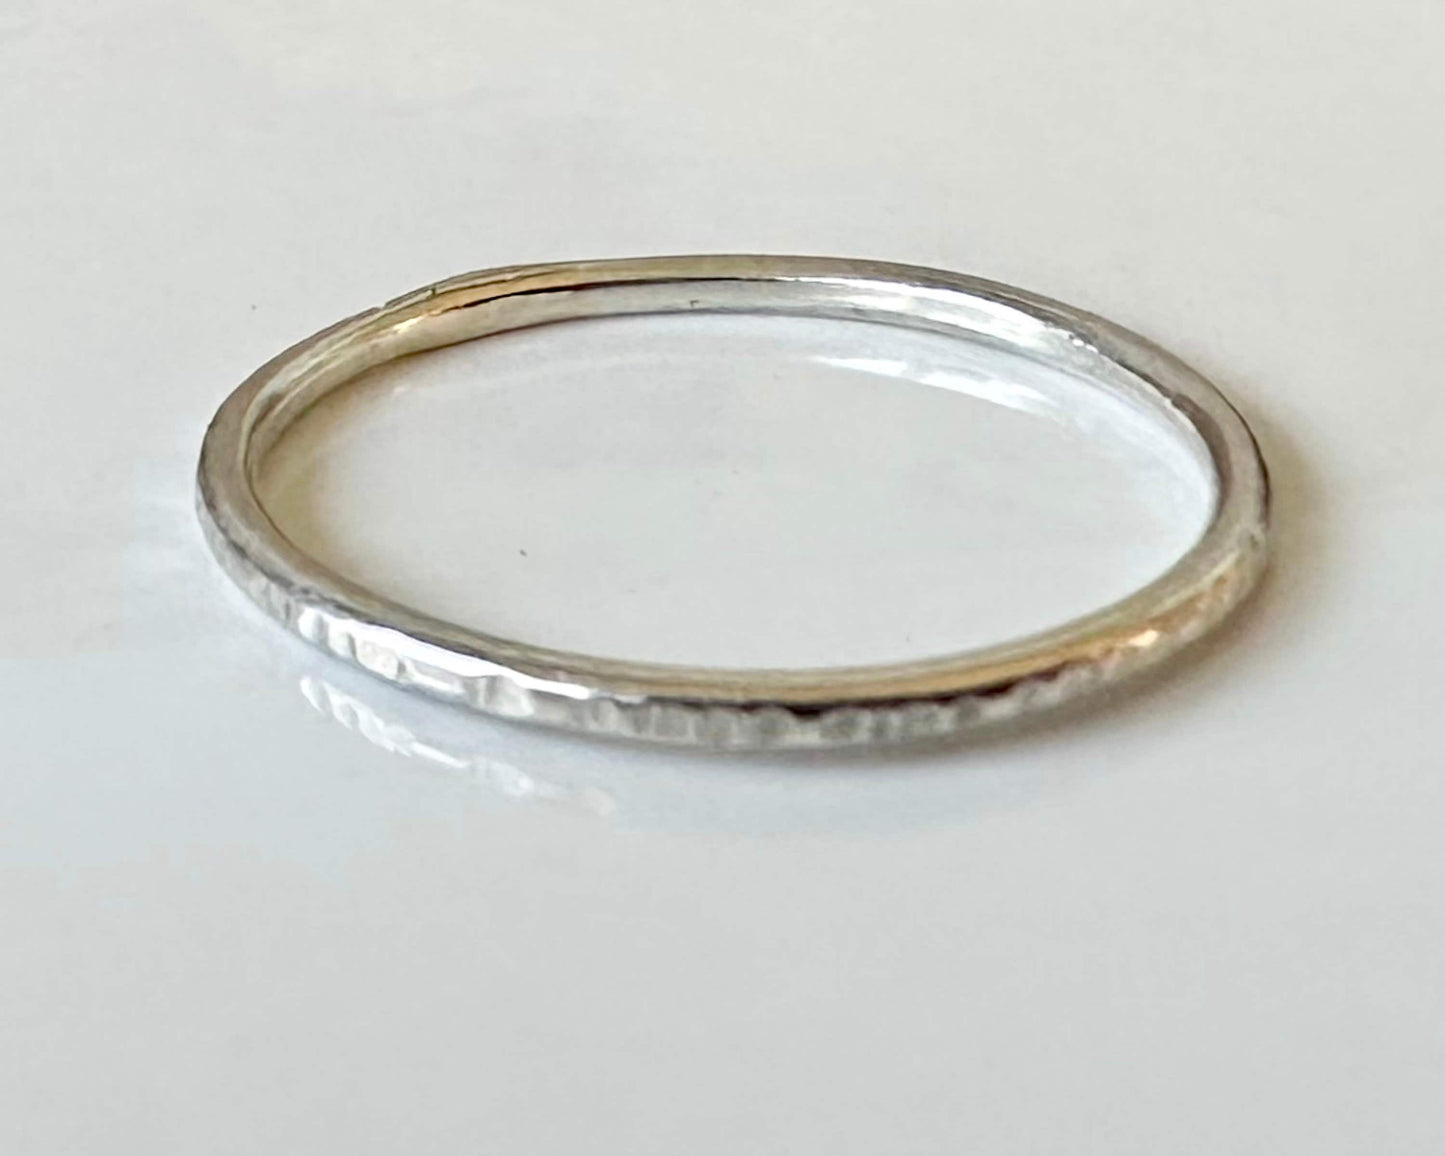 Solid 9ct Gold and 925 Sterling Silver Stacking Rings set, Hallmarked 1.2mm, 1.5m, 1.8mm Gold and Silver Ring Set of Four